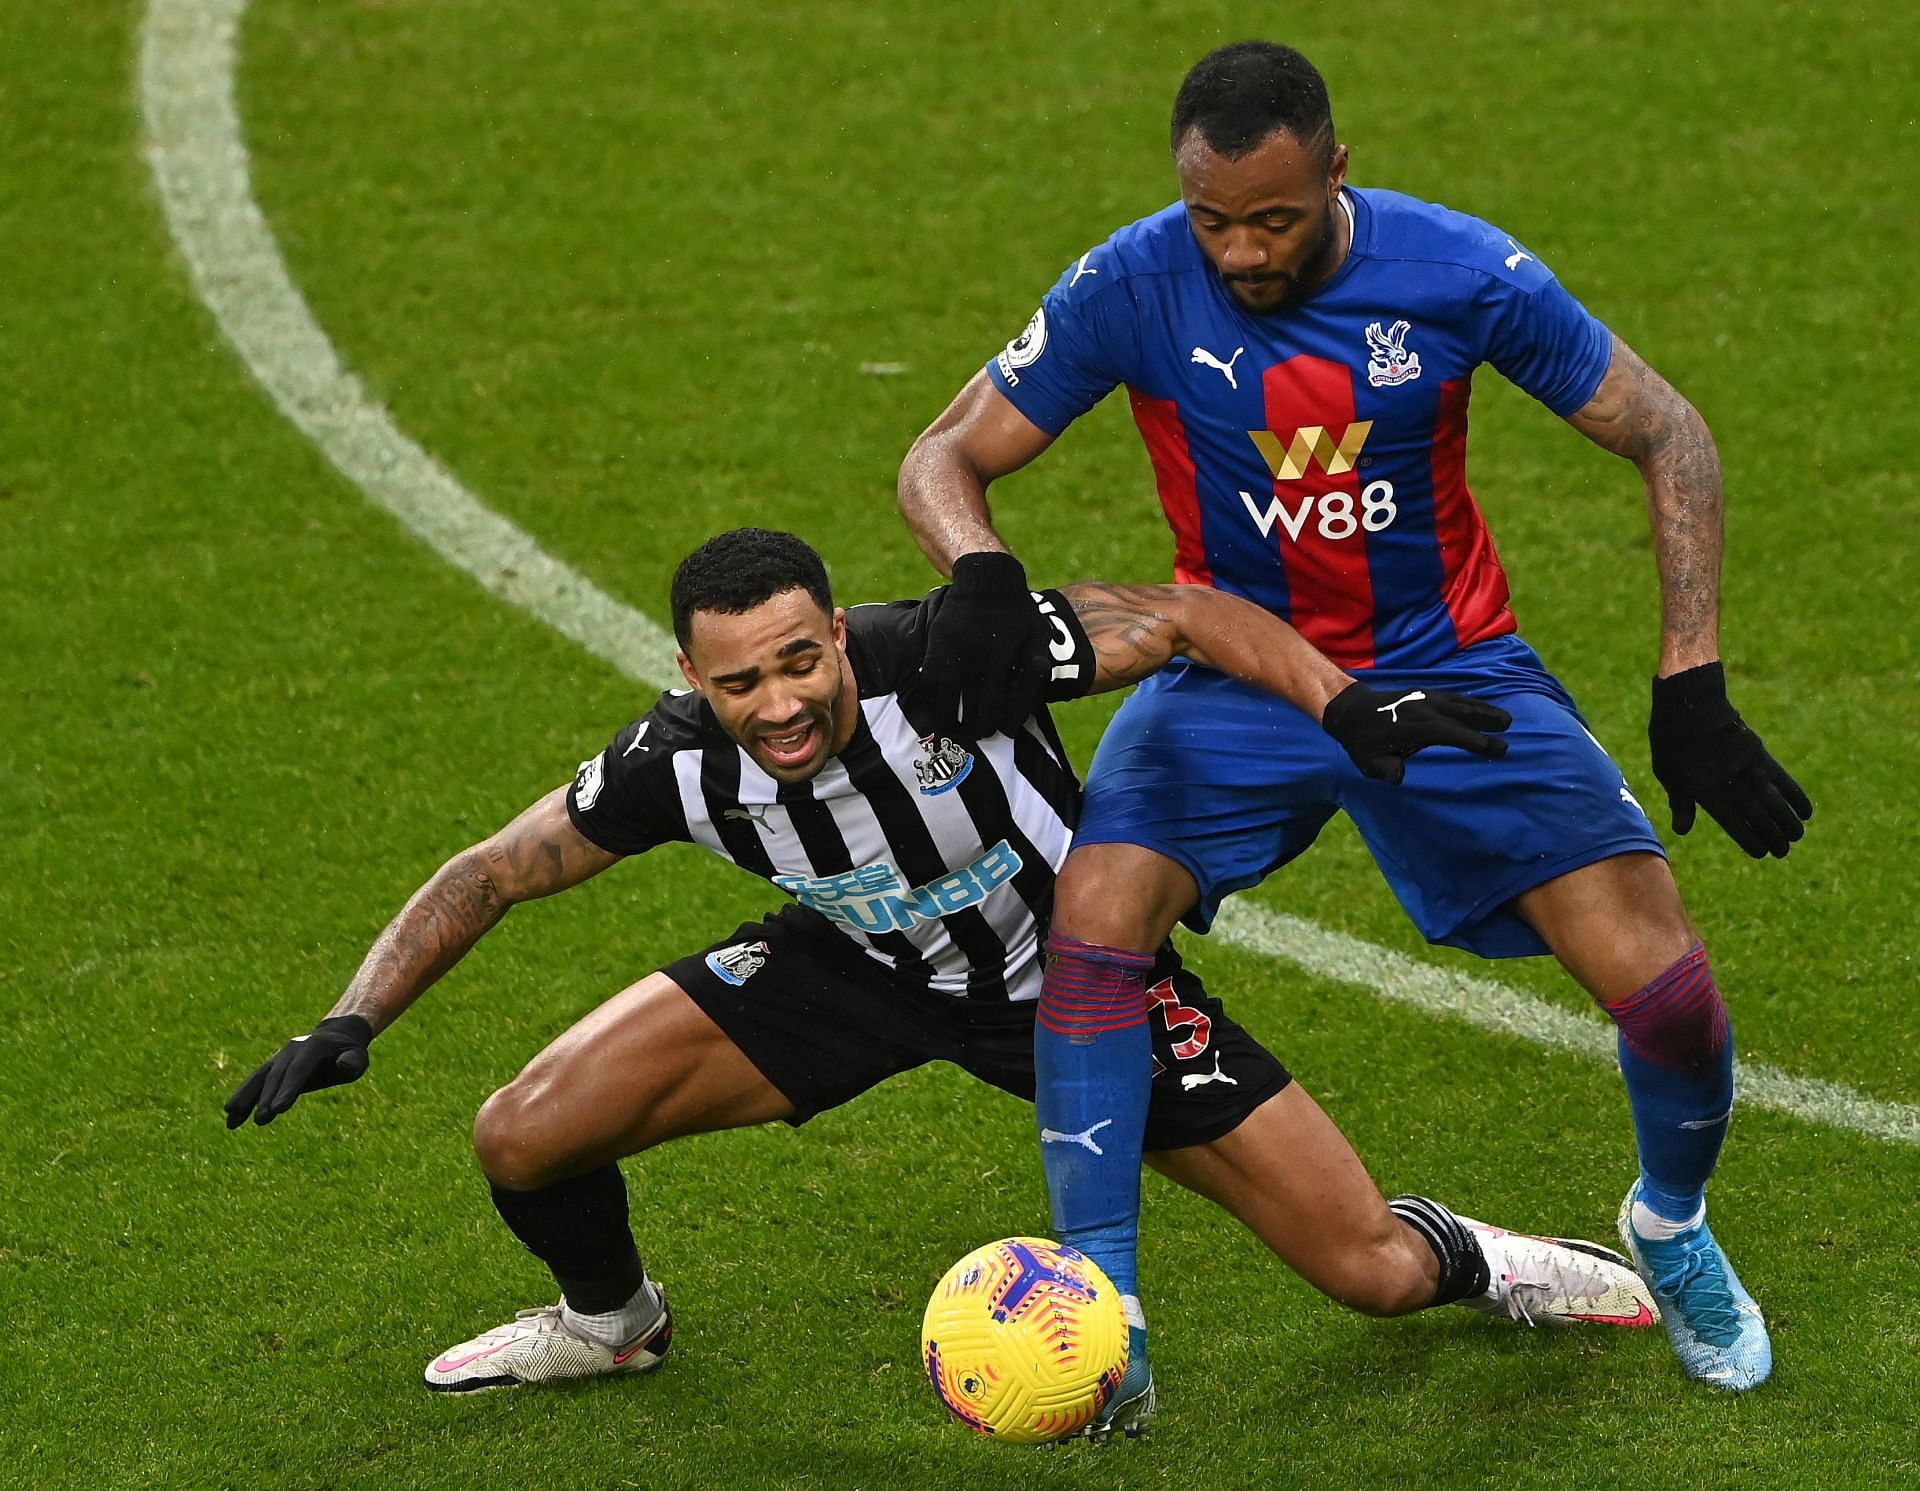 Newcastle United take on Crystal Palace this weekend